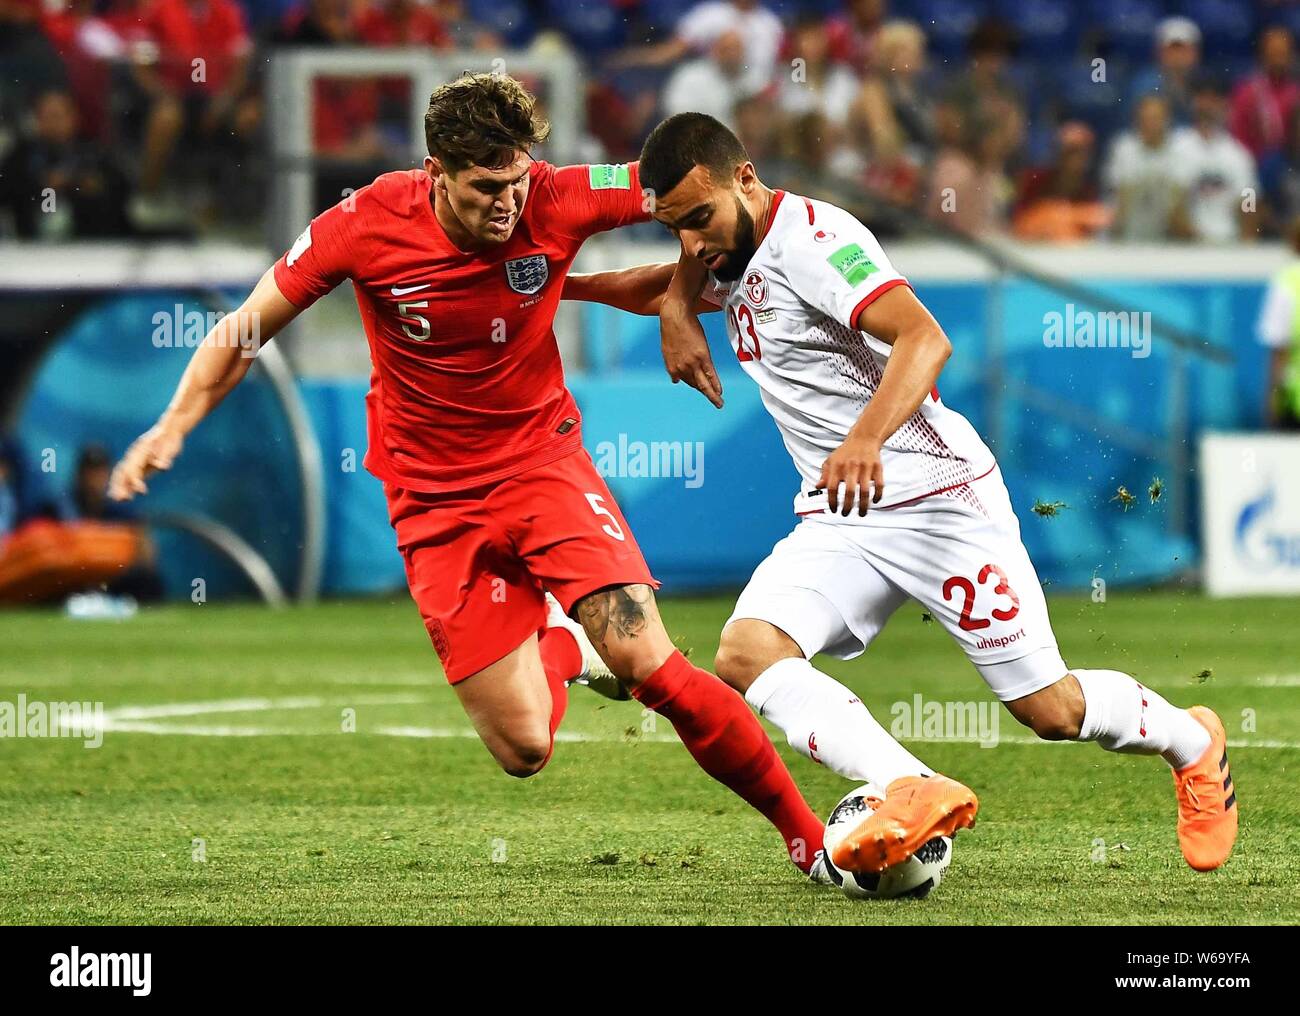 John Stones of England, left, challenges Naim Sliti of Tunisia in their Group G match during the 2018 FIFA World Cup in Volgograd, Russia, 18 June 201 Stock Photo